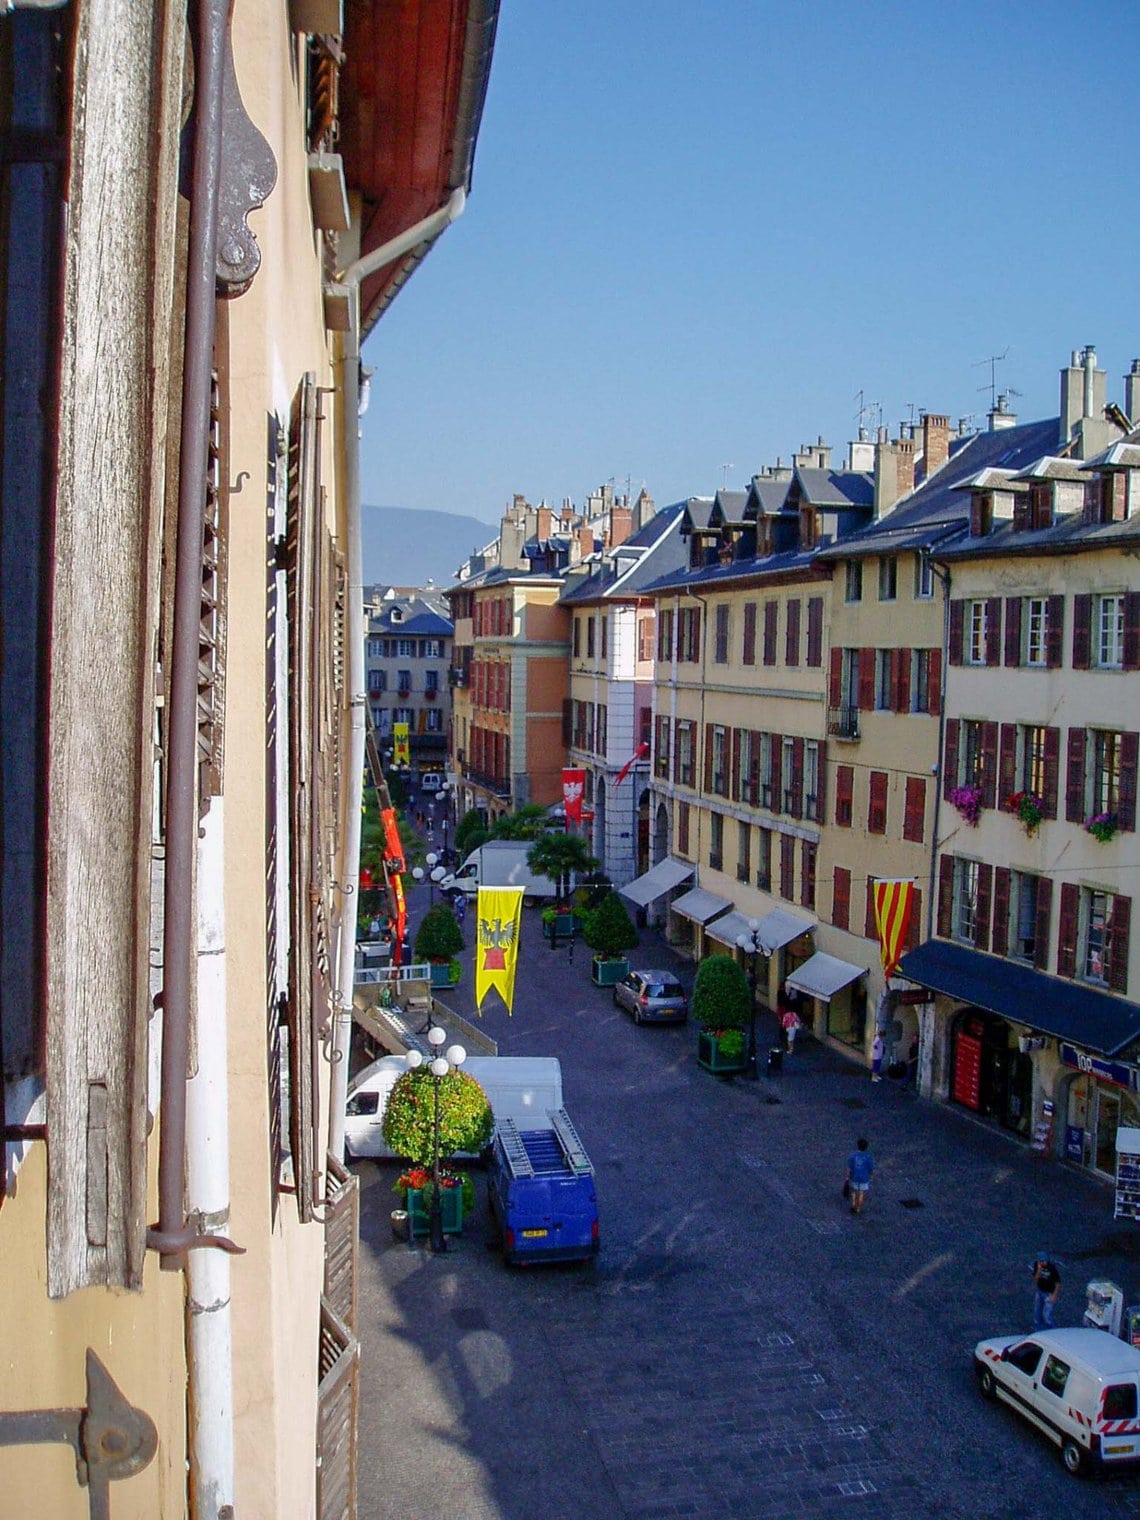 View of Chambery old town from a window.